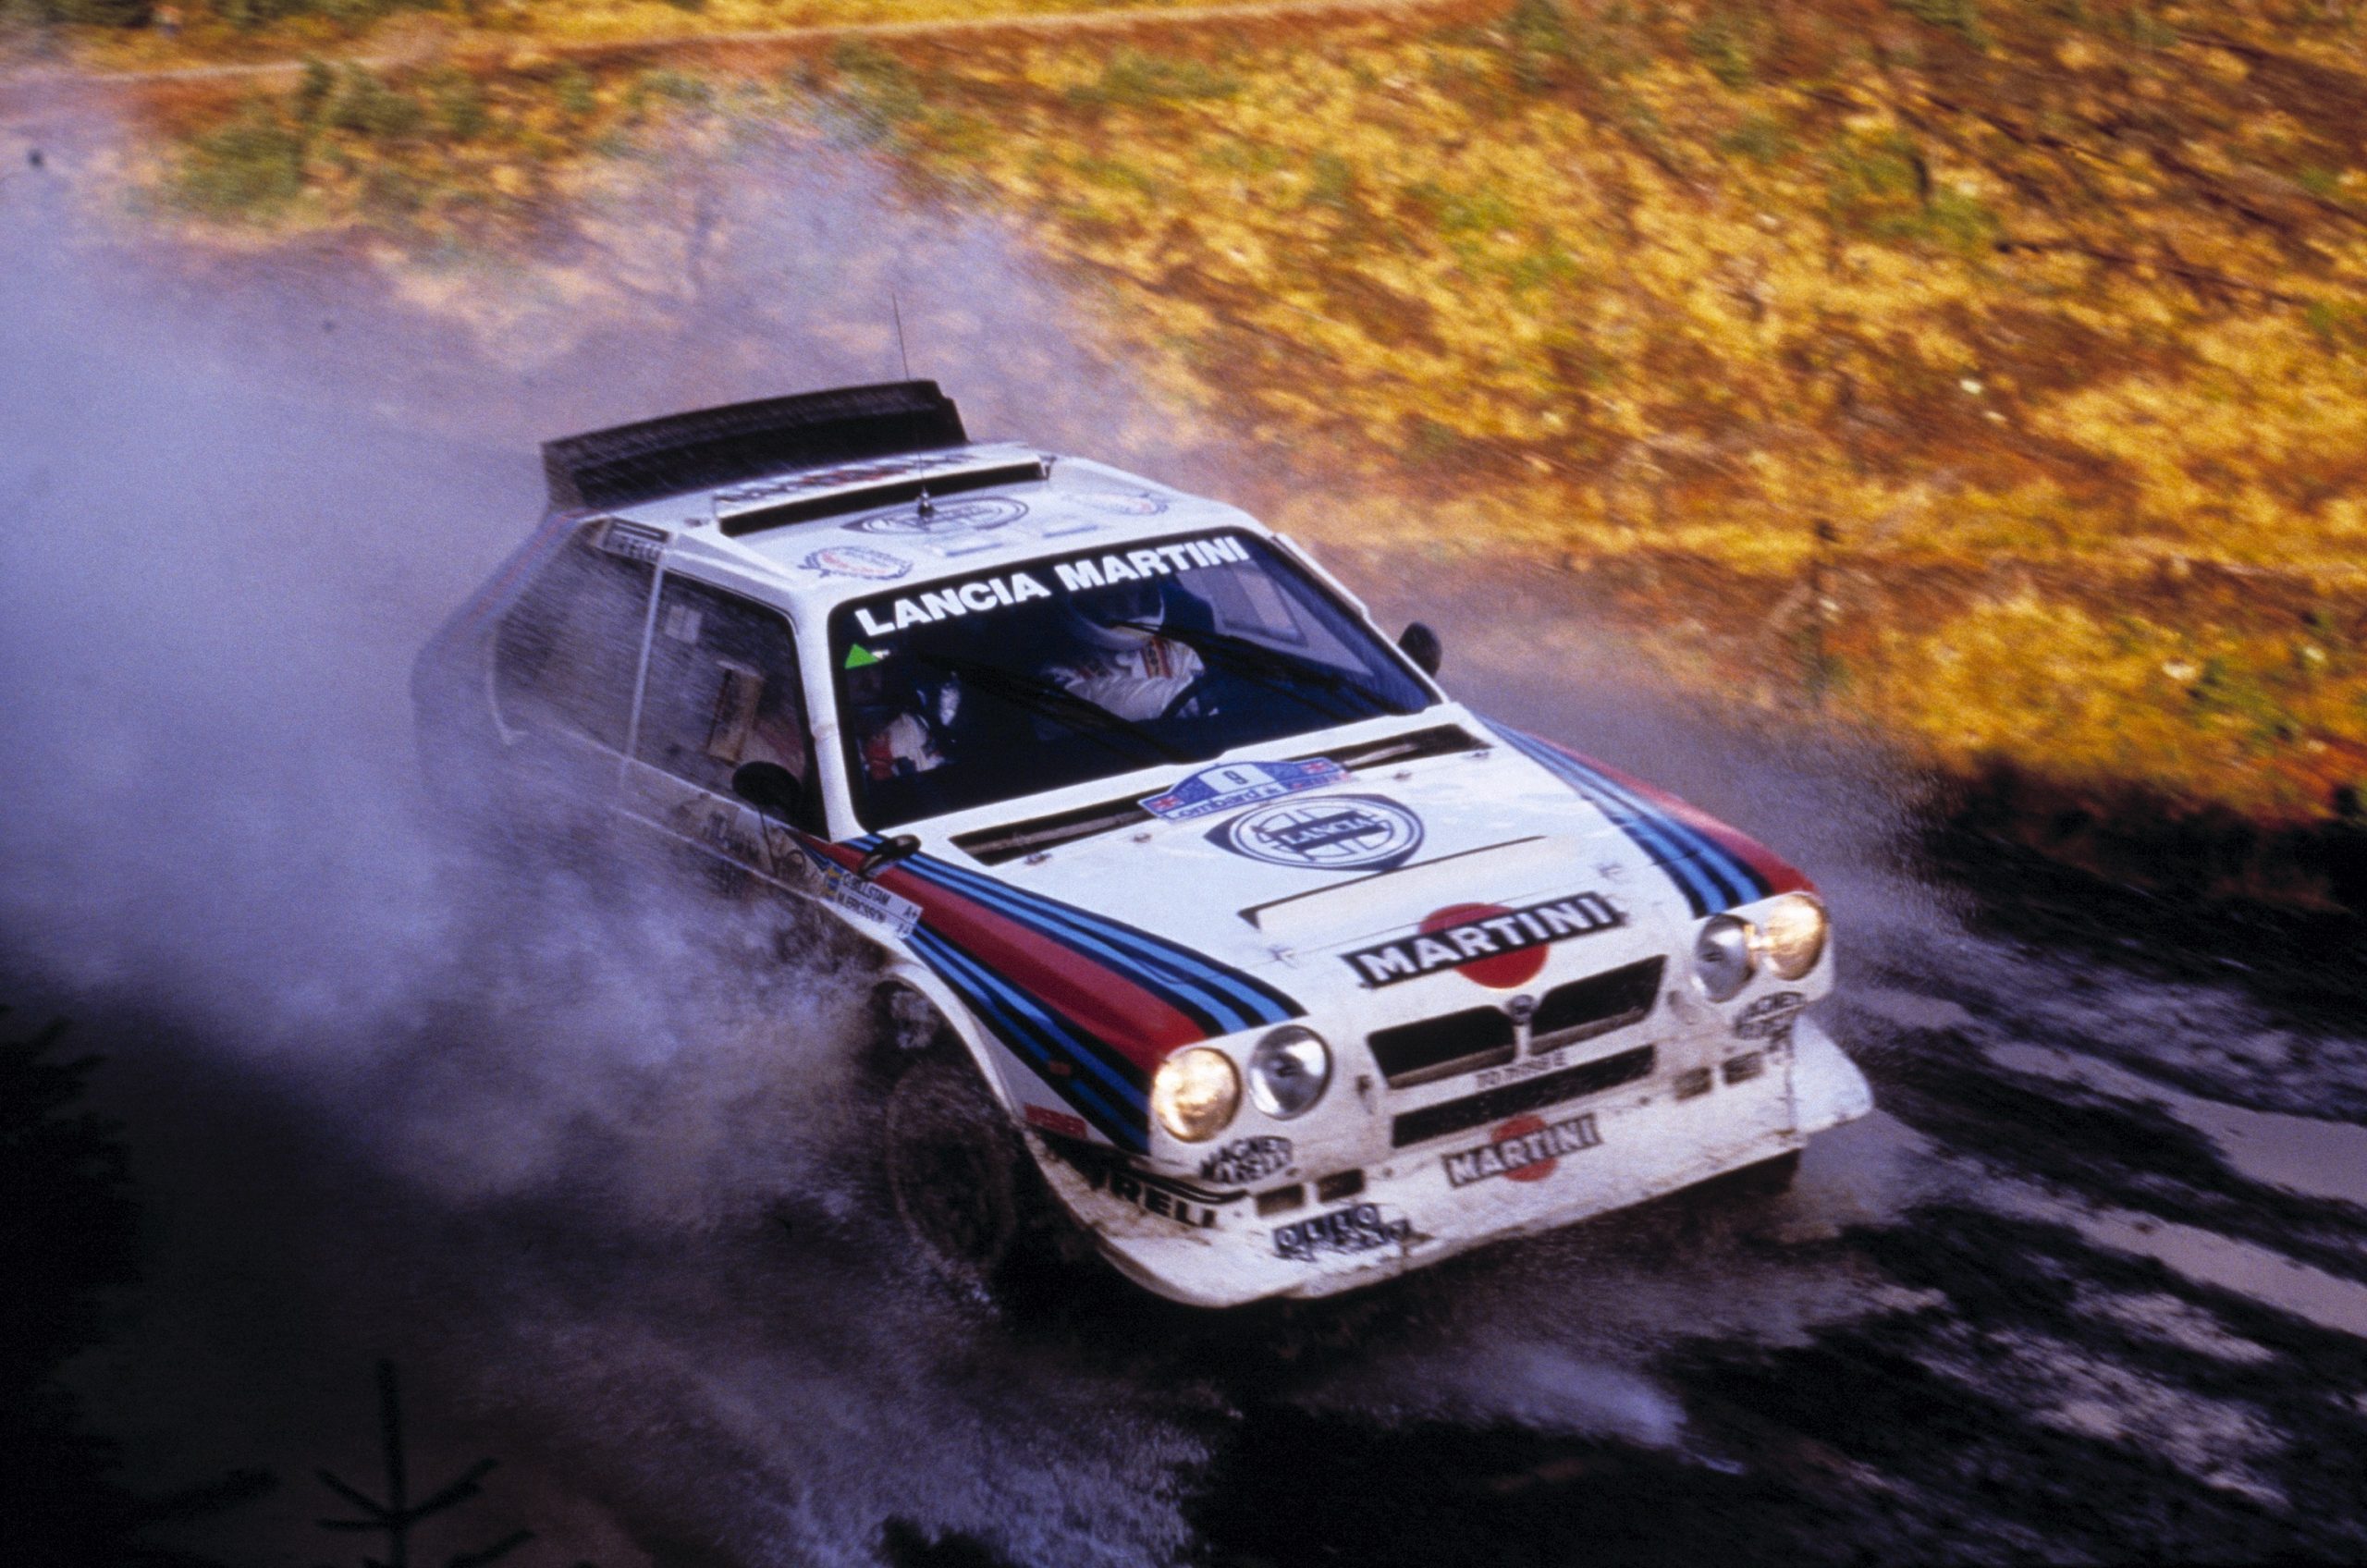 A blue and white Martini livery Lancia Delta S4 rally car racing through a muddy puddle on a rally stage.